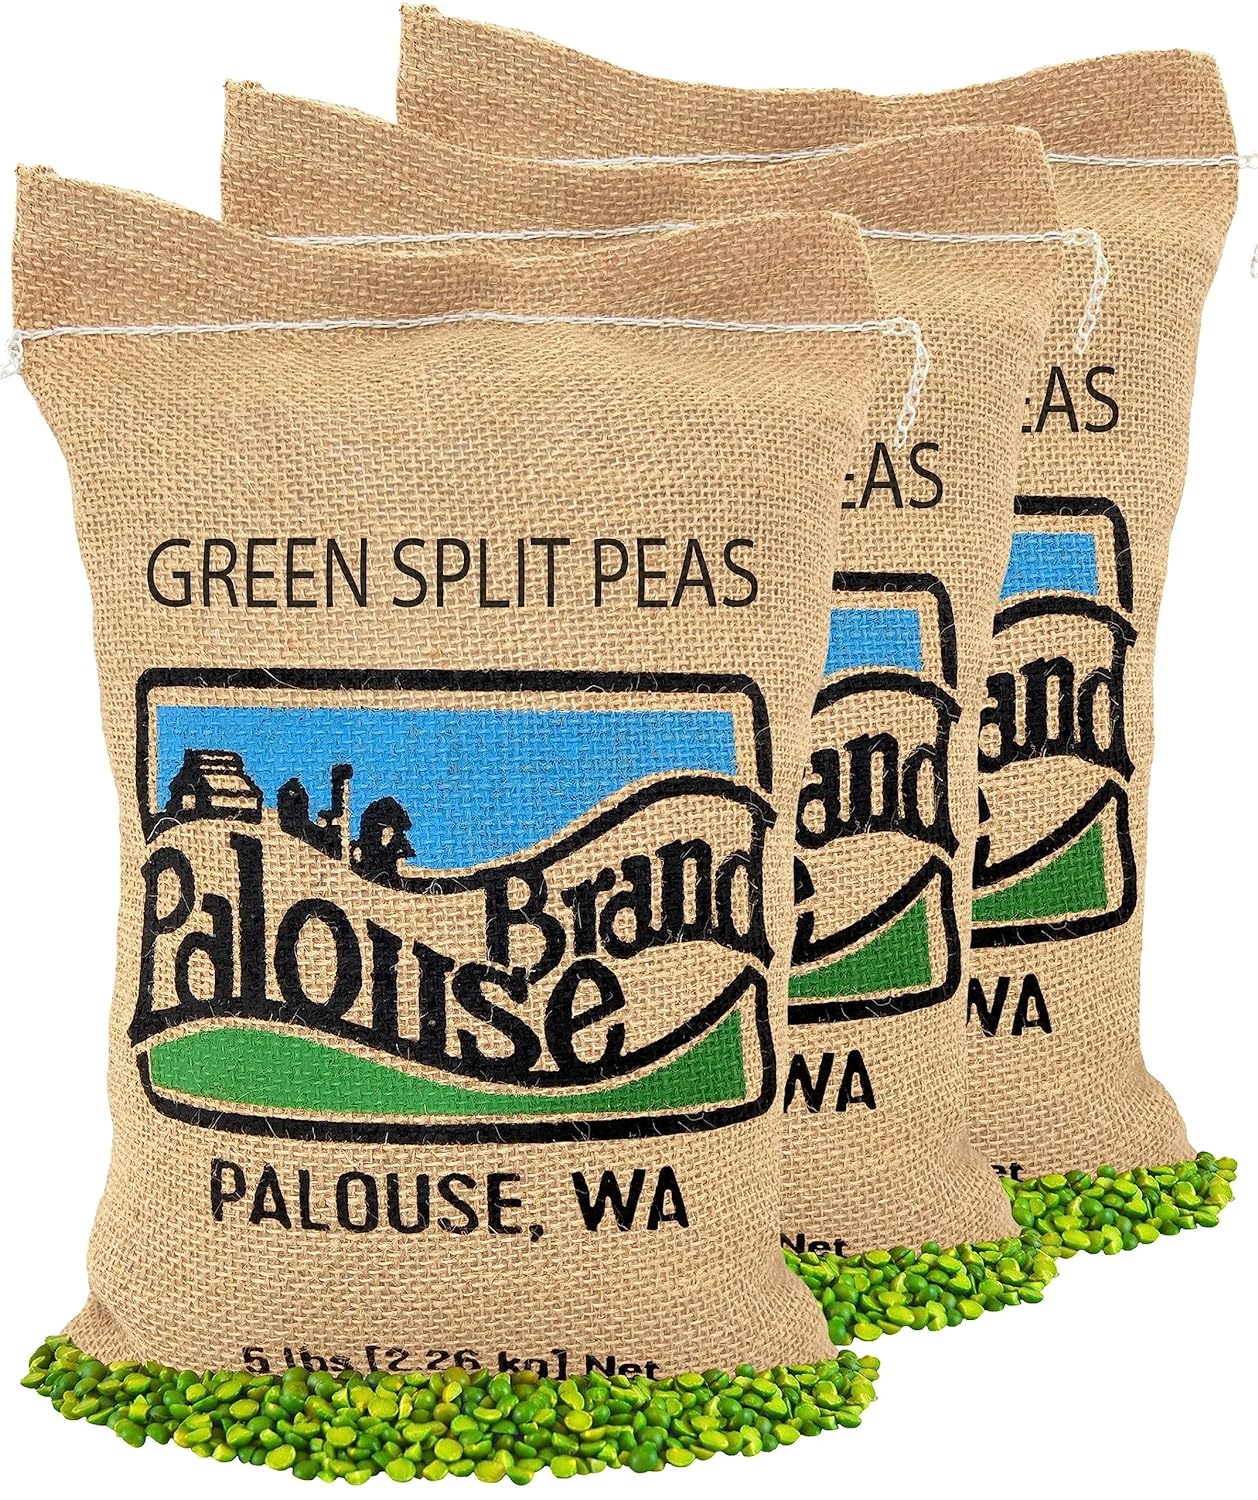 Green Split Peas | 15 LBS | 100% Desiccant Free | Family Farmed in Washington State | Non-GMO Project Verified | 100% Non-Irradiated | Certified Kosher Parve | Field Traced | (5 Pound, Pack of 3)